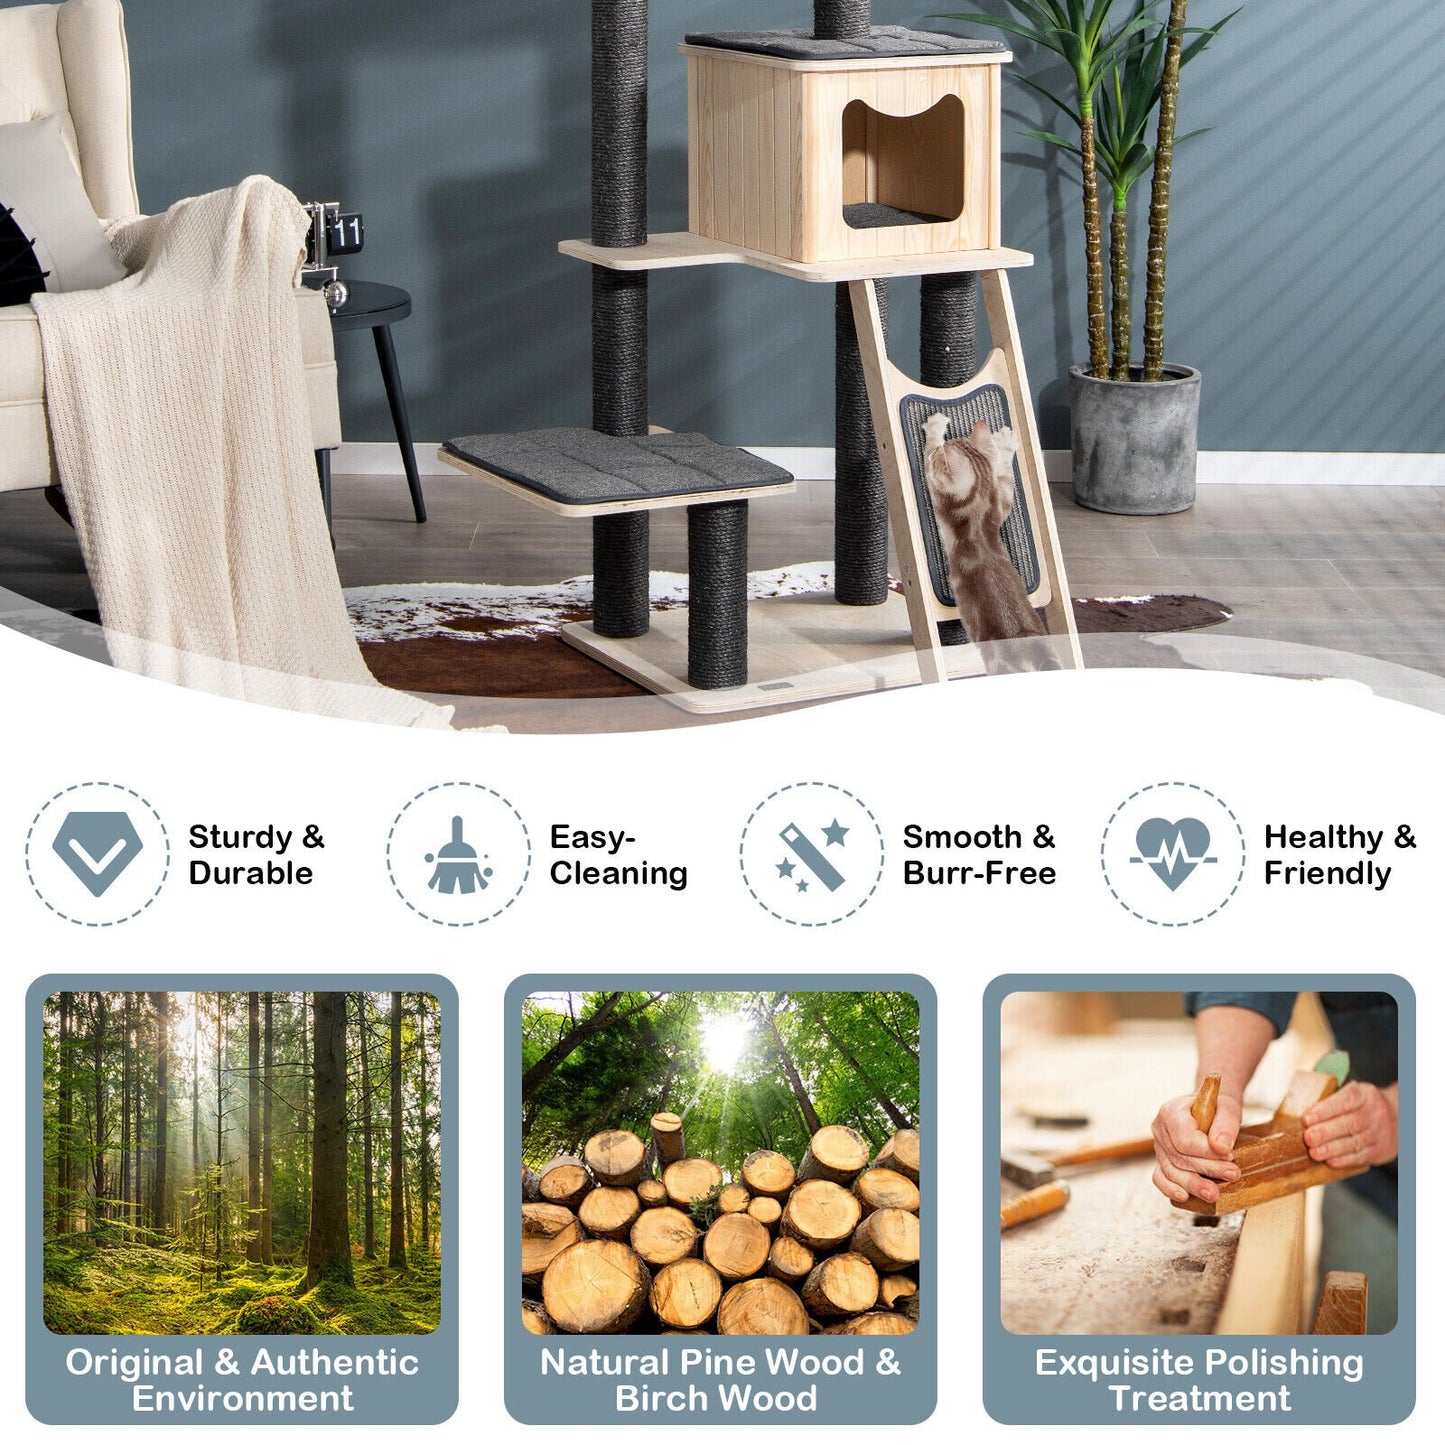 5-Tier Modern Wood Cat Tower with Washable Cushions, Gray - Gallery Canada